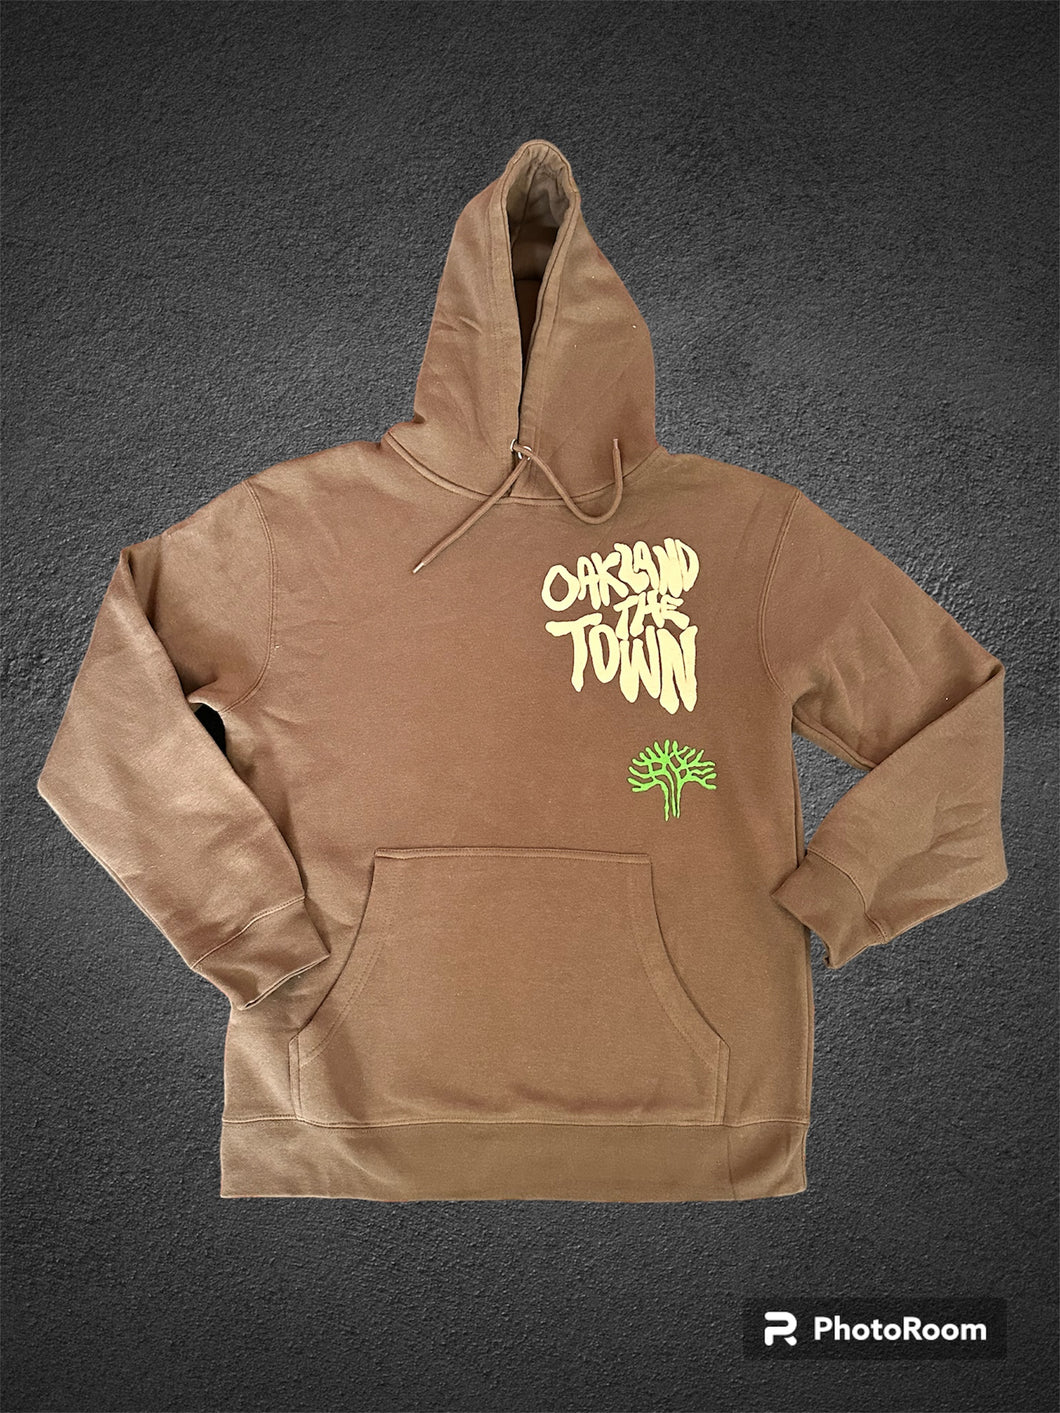 OAKLAND THE TOWN (hoodie)